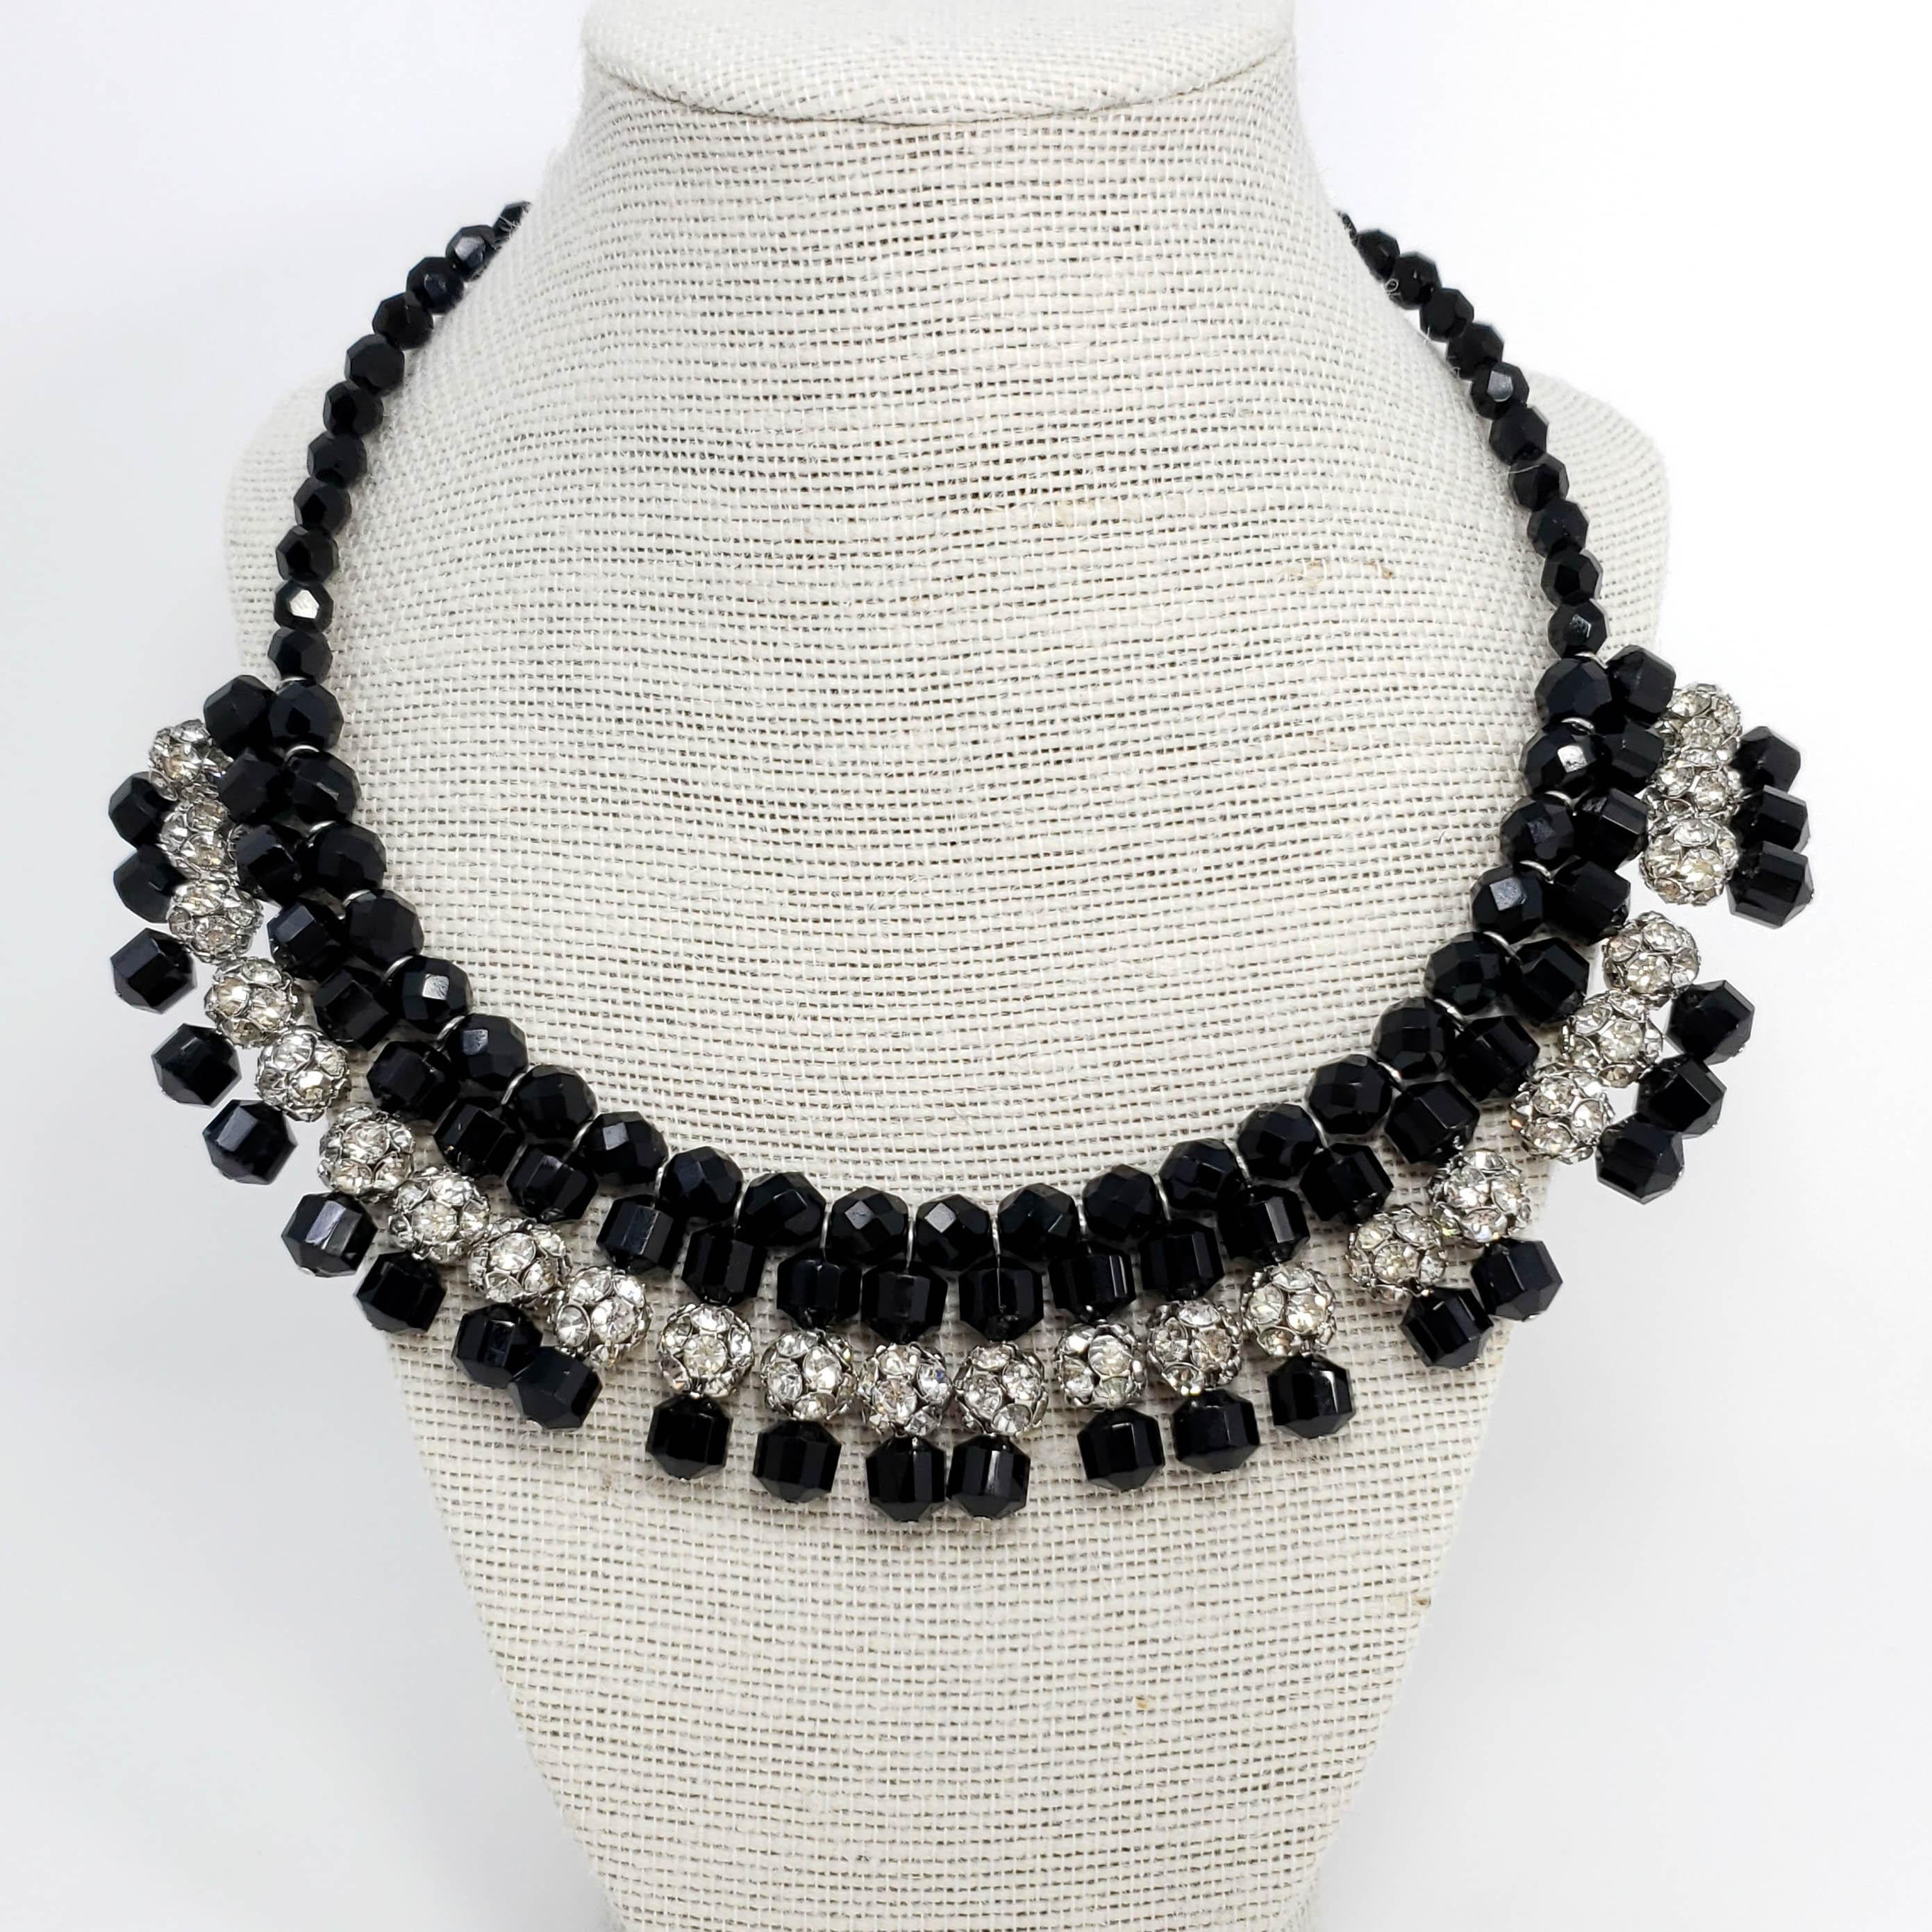 A vintage collar necklace featuring faceted jet-black glass beads accented with silvertone pave-crystal balls. 

The necklace is on a silver tone metal wire which curls naturally. Hook closure.
